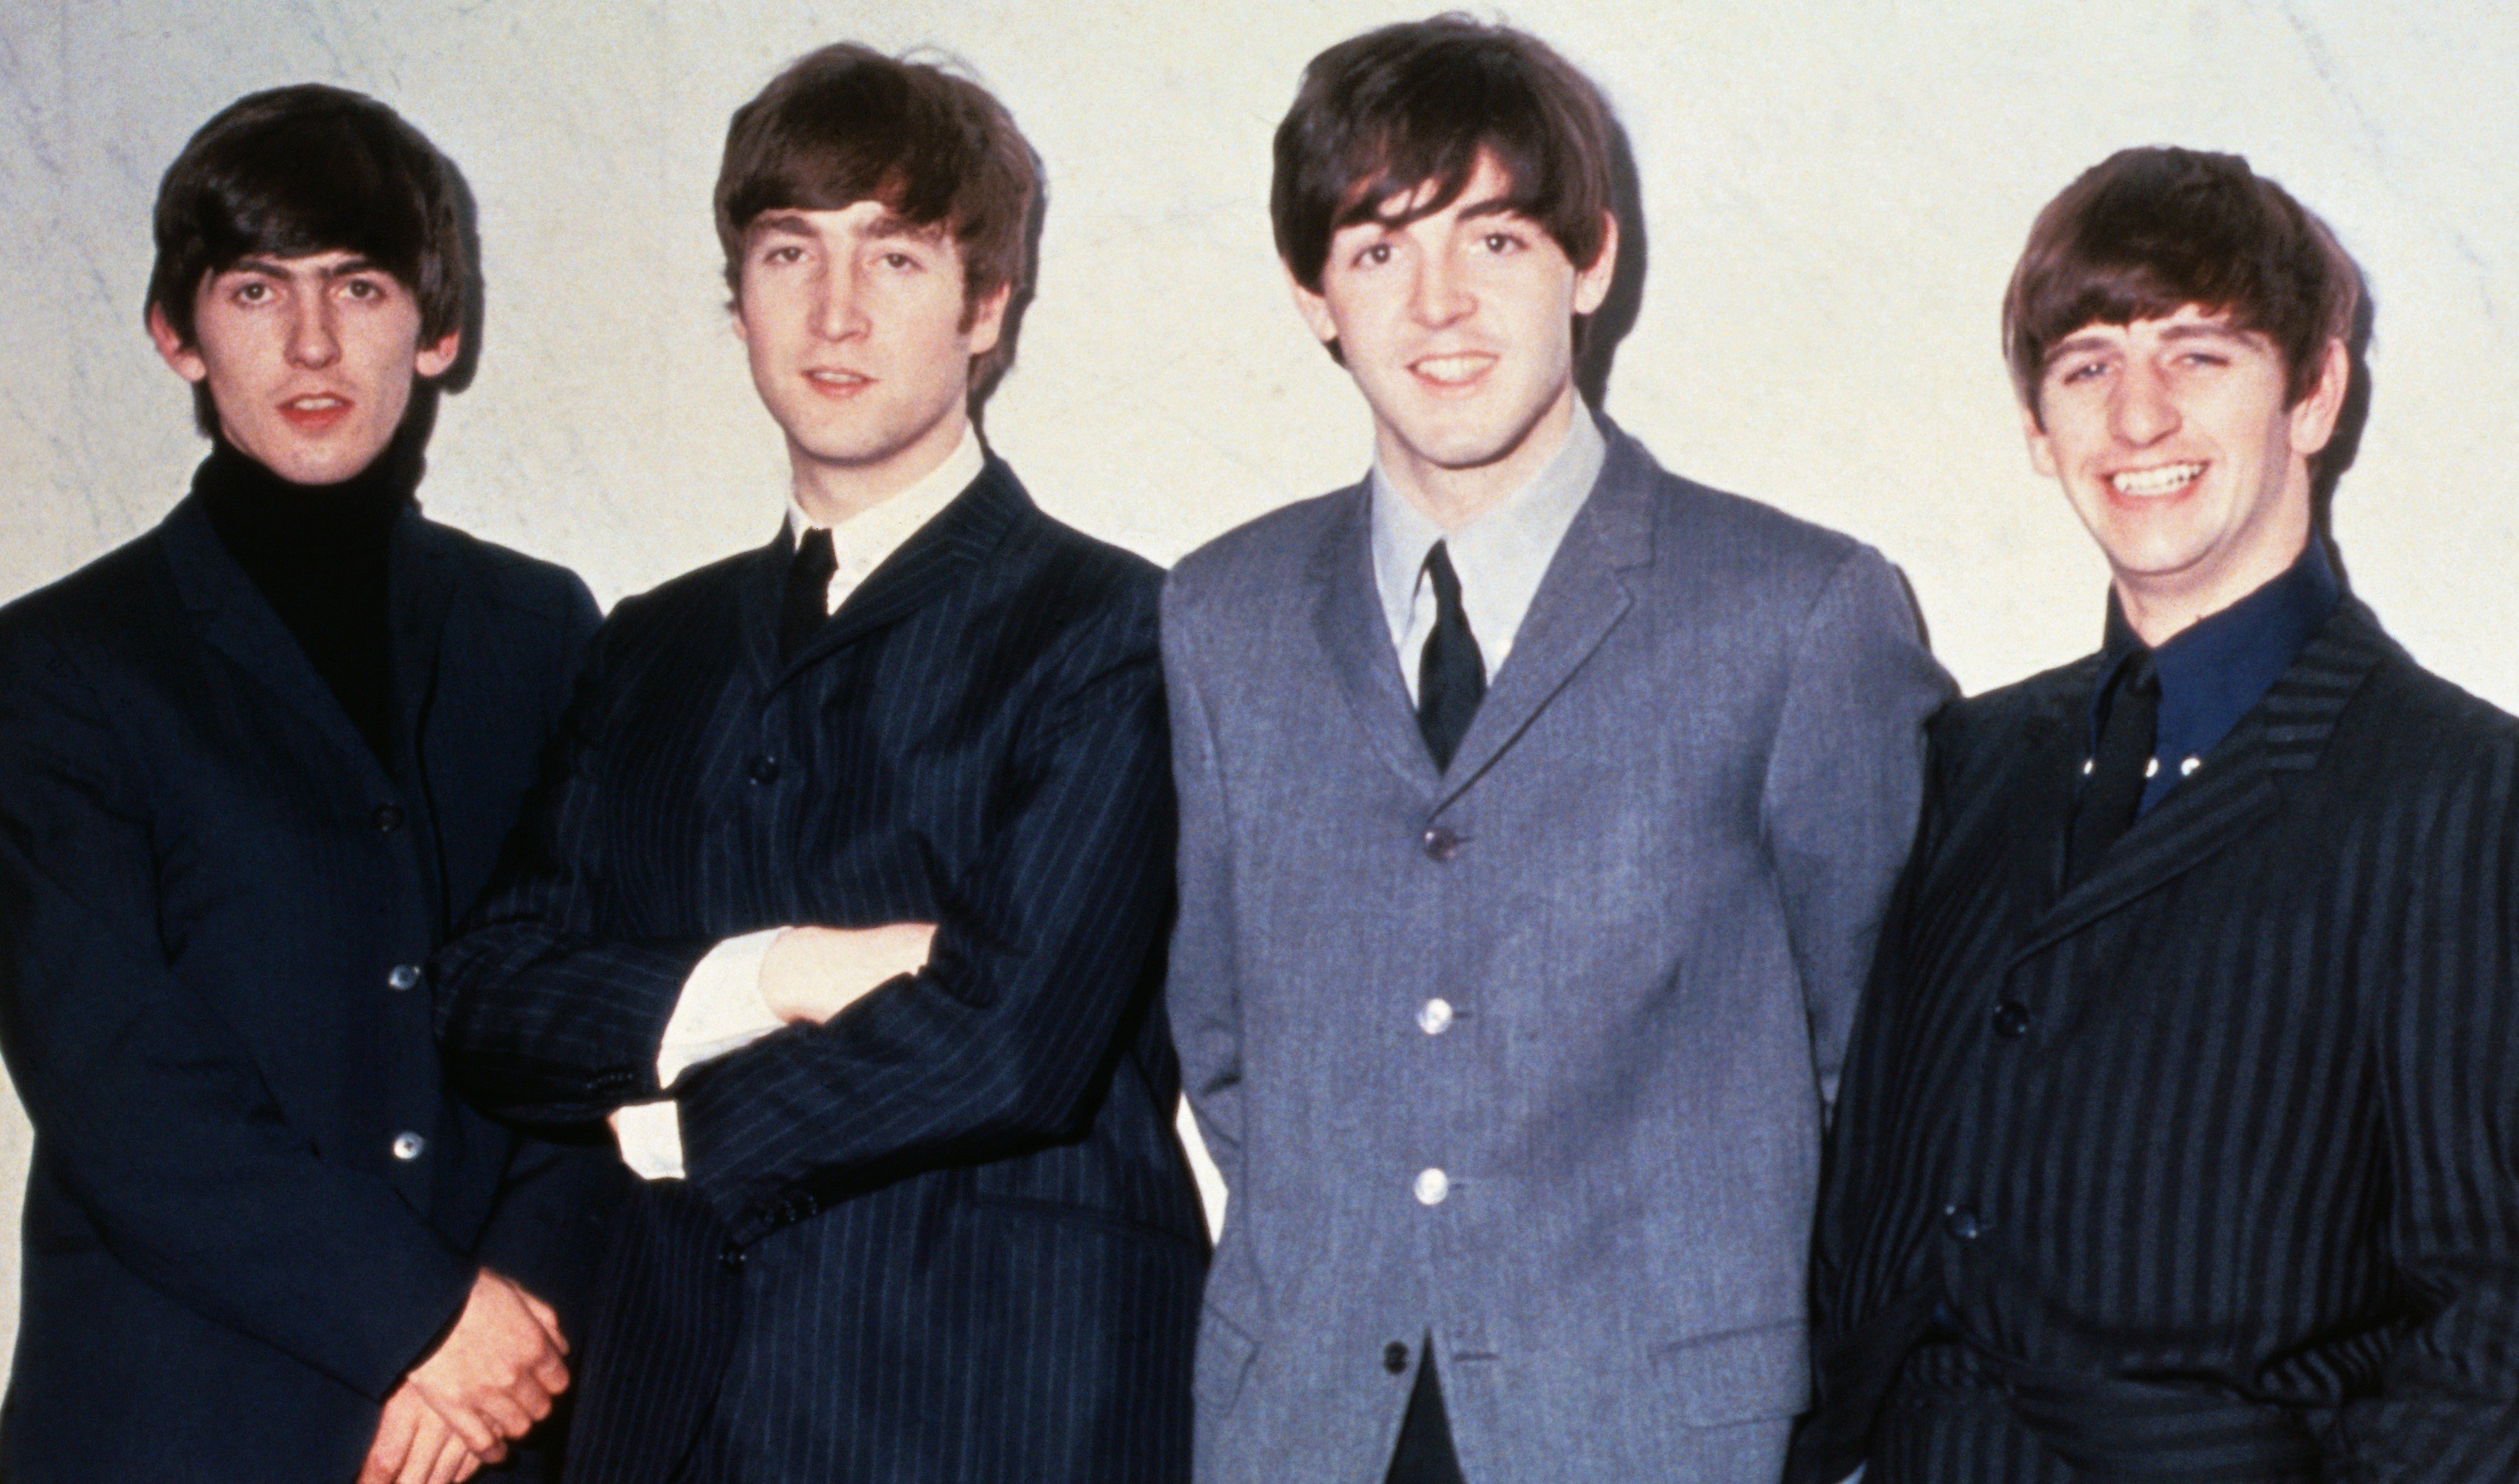 The Beatles on suits during the "Love Me Do" era